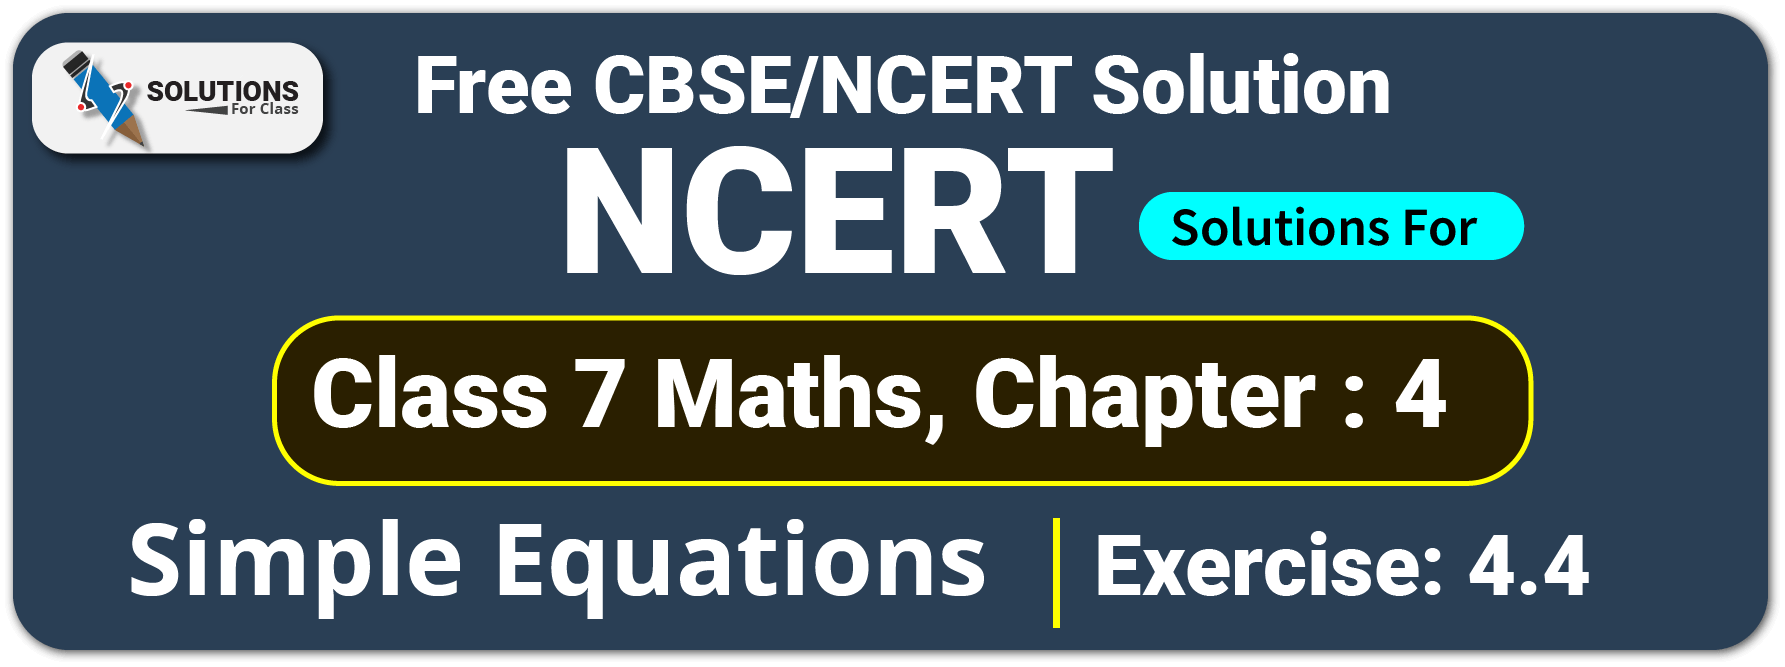 NCERT Solutions For Class 7 Maths Chapter 4, Simple Equations, Exercise 4.4